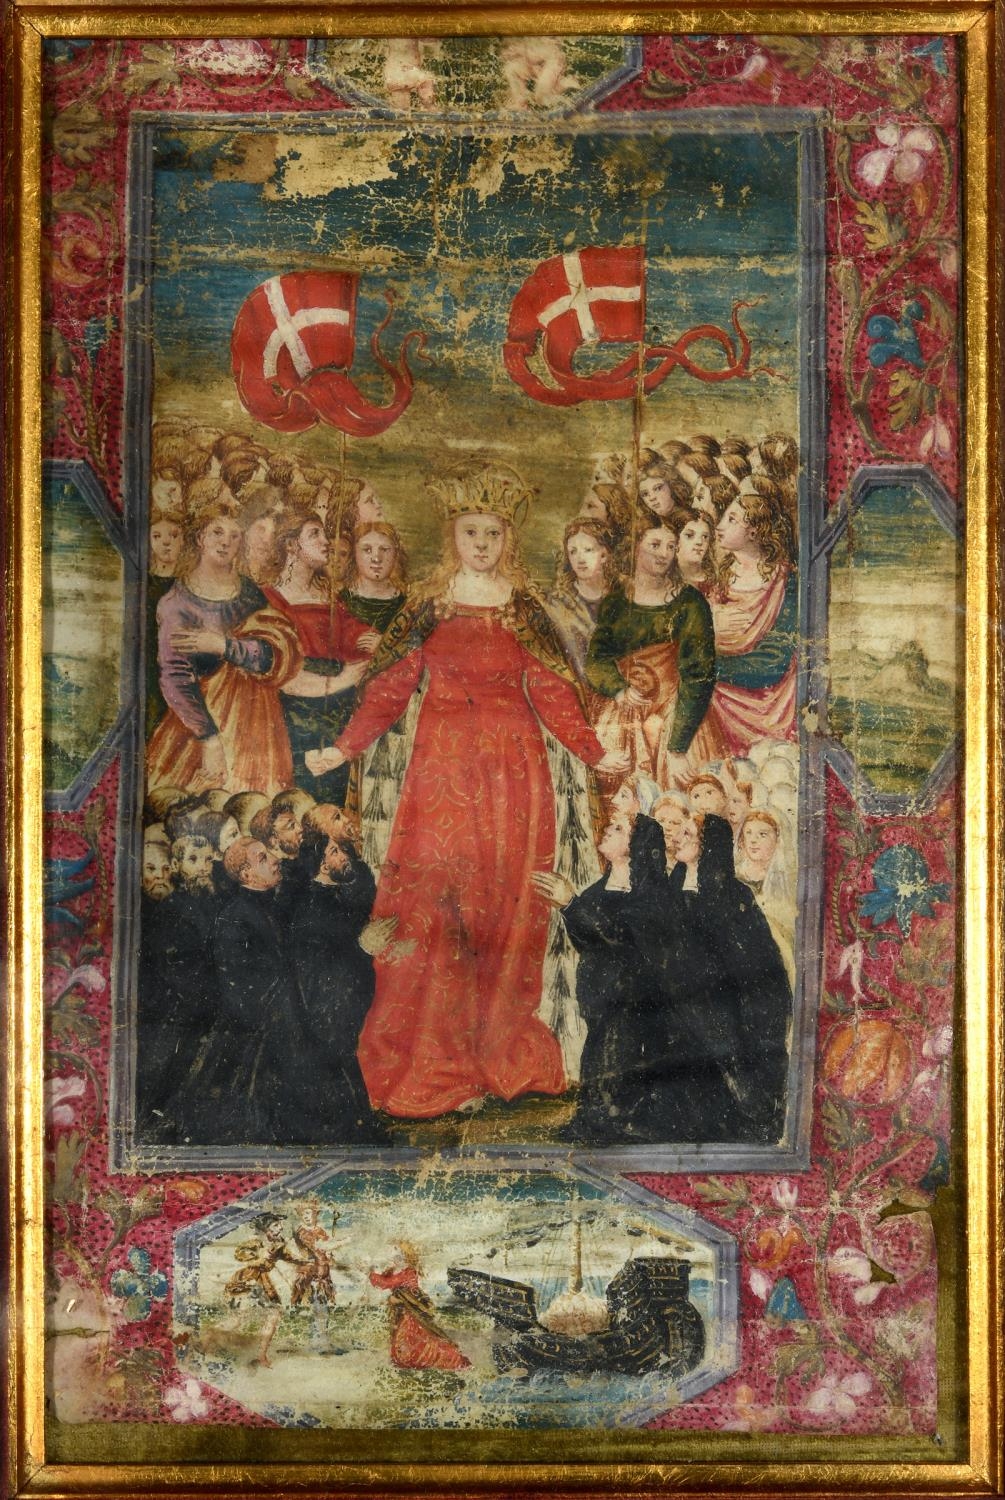 THE BETROTHAL OF ST. URSULA by The Spanish Forger, 1930